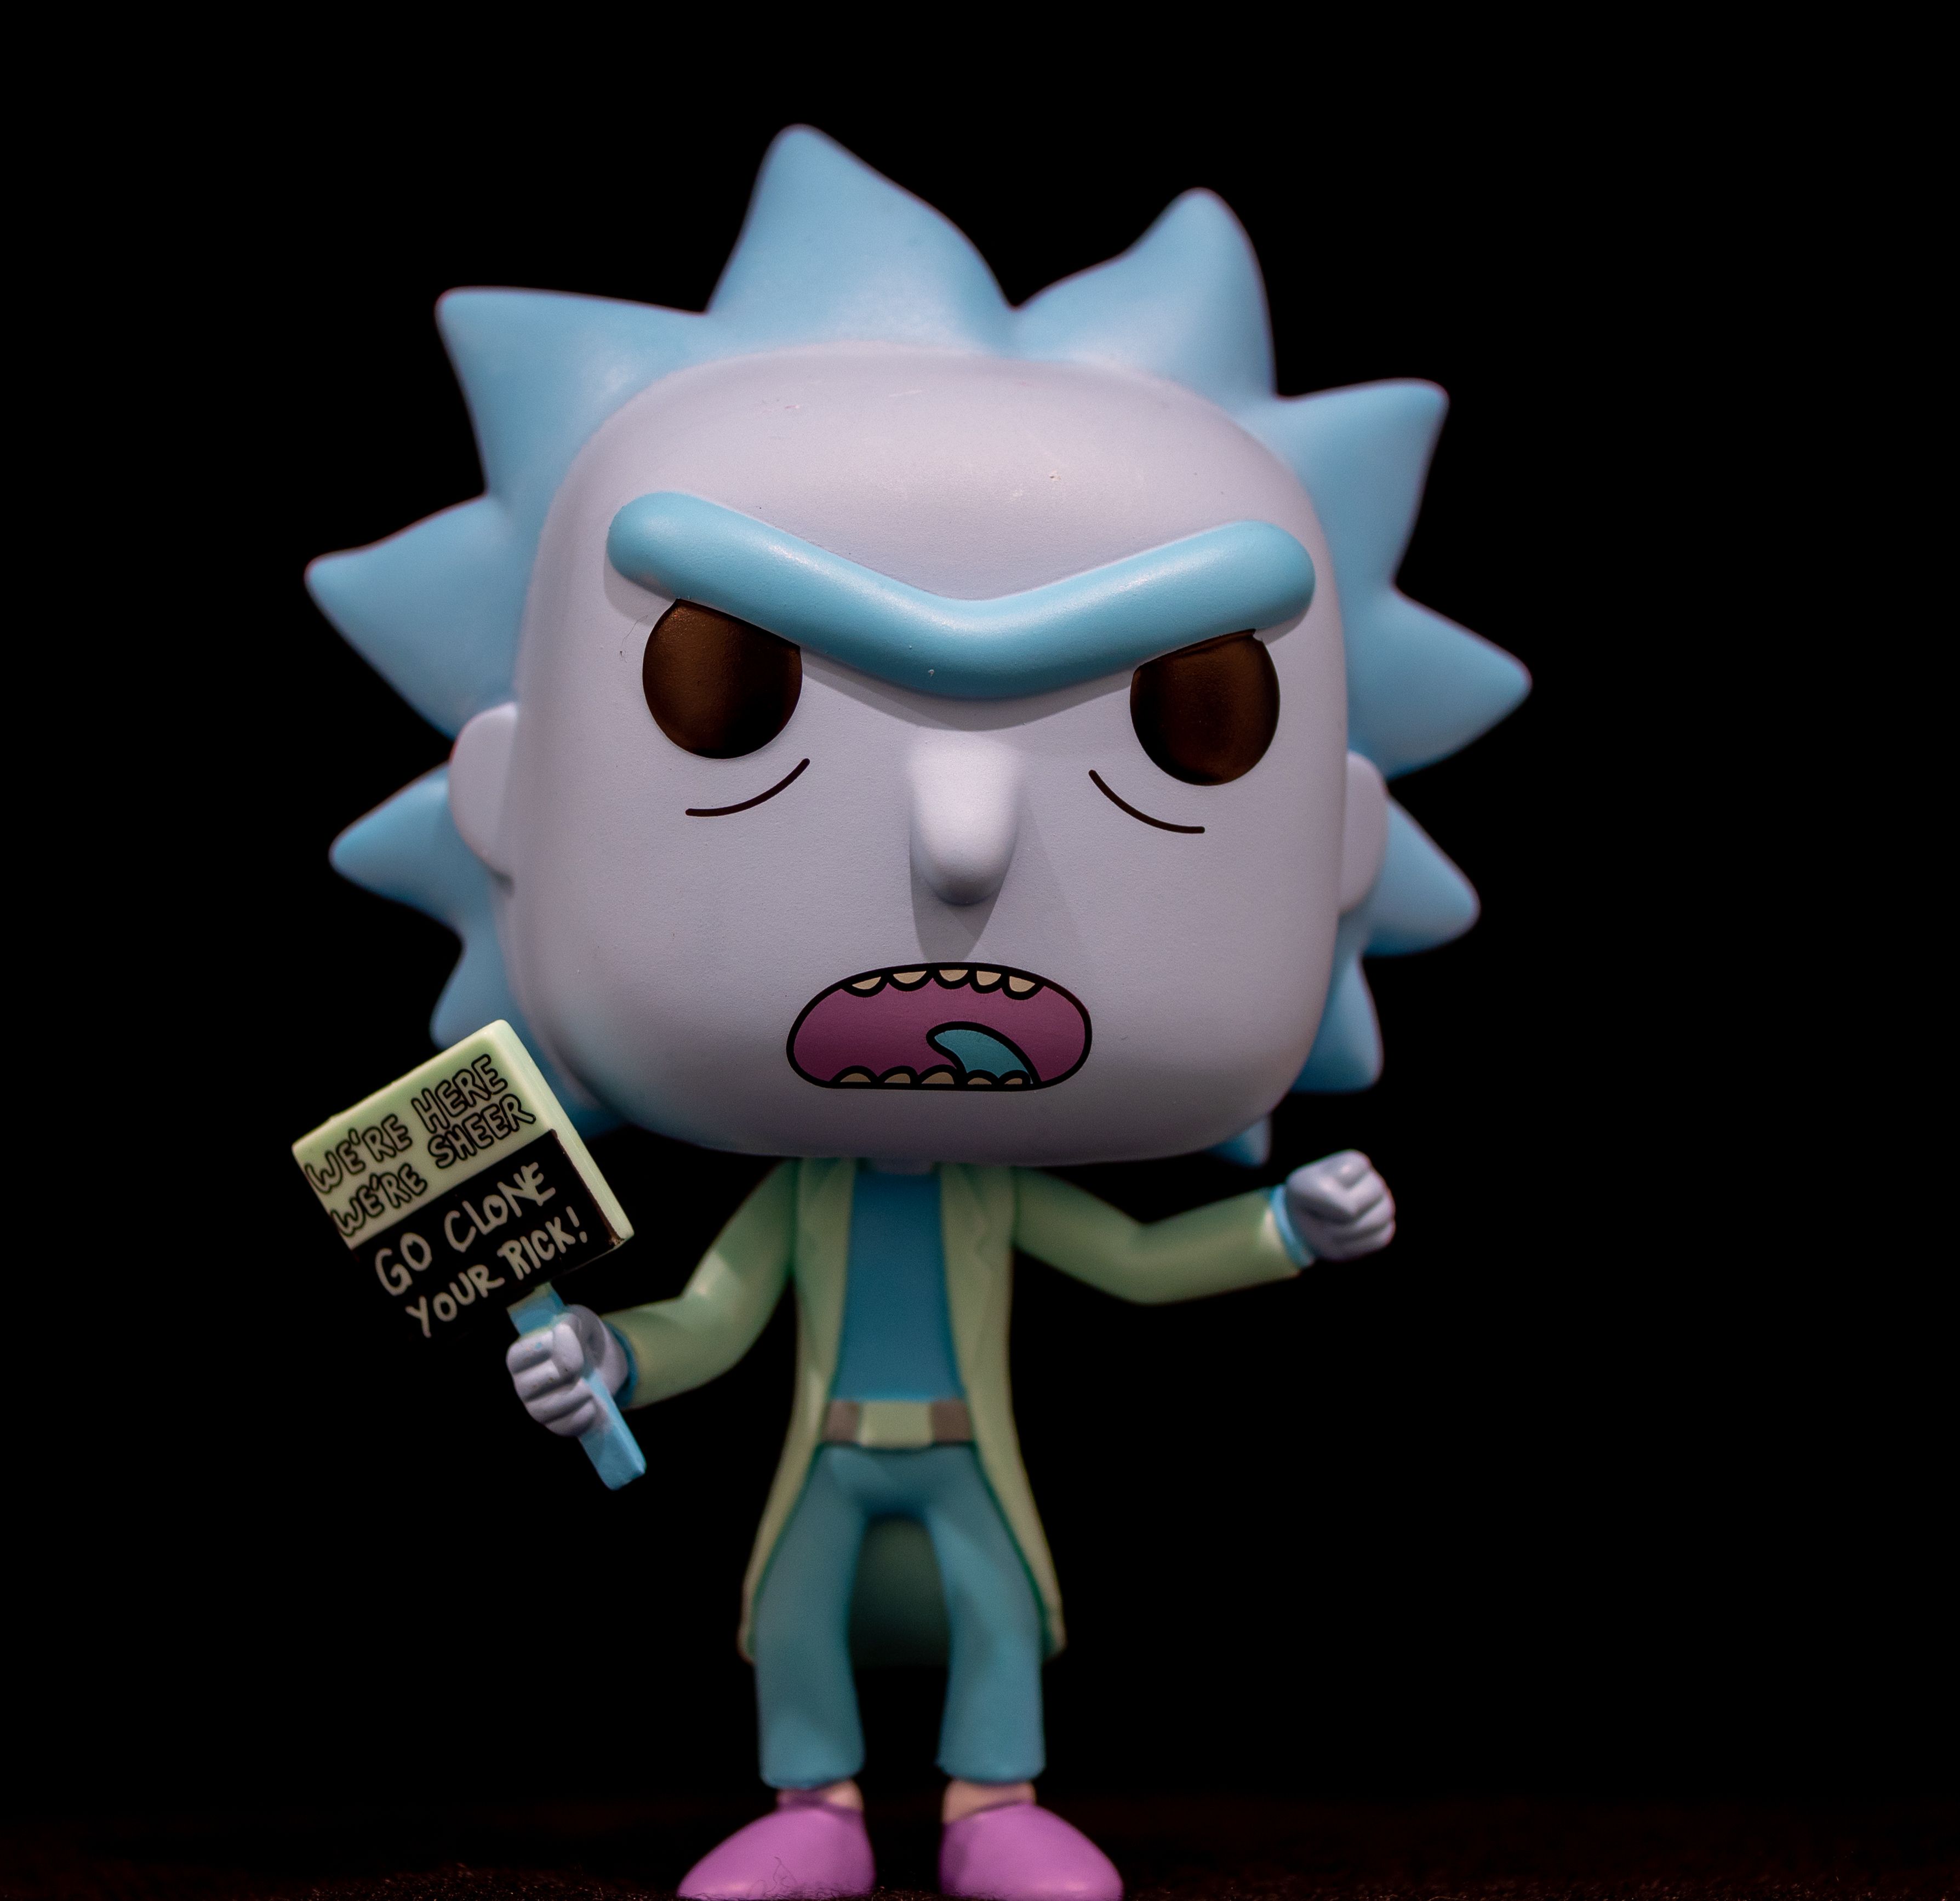 Free of Funko Pop, plastic toys, Rick and morty